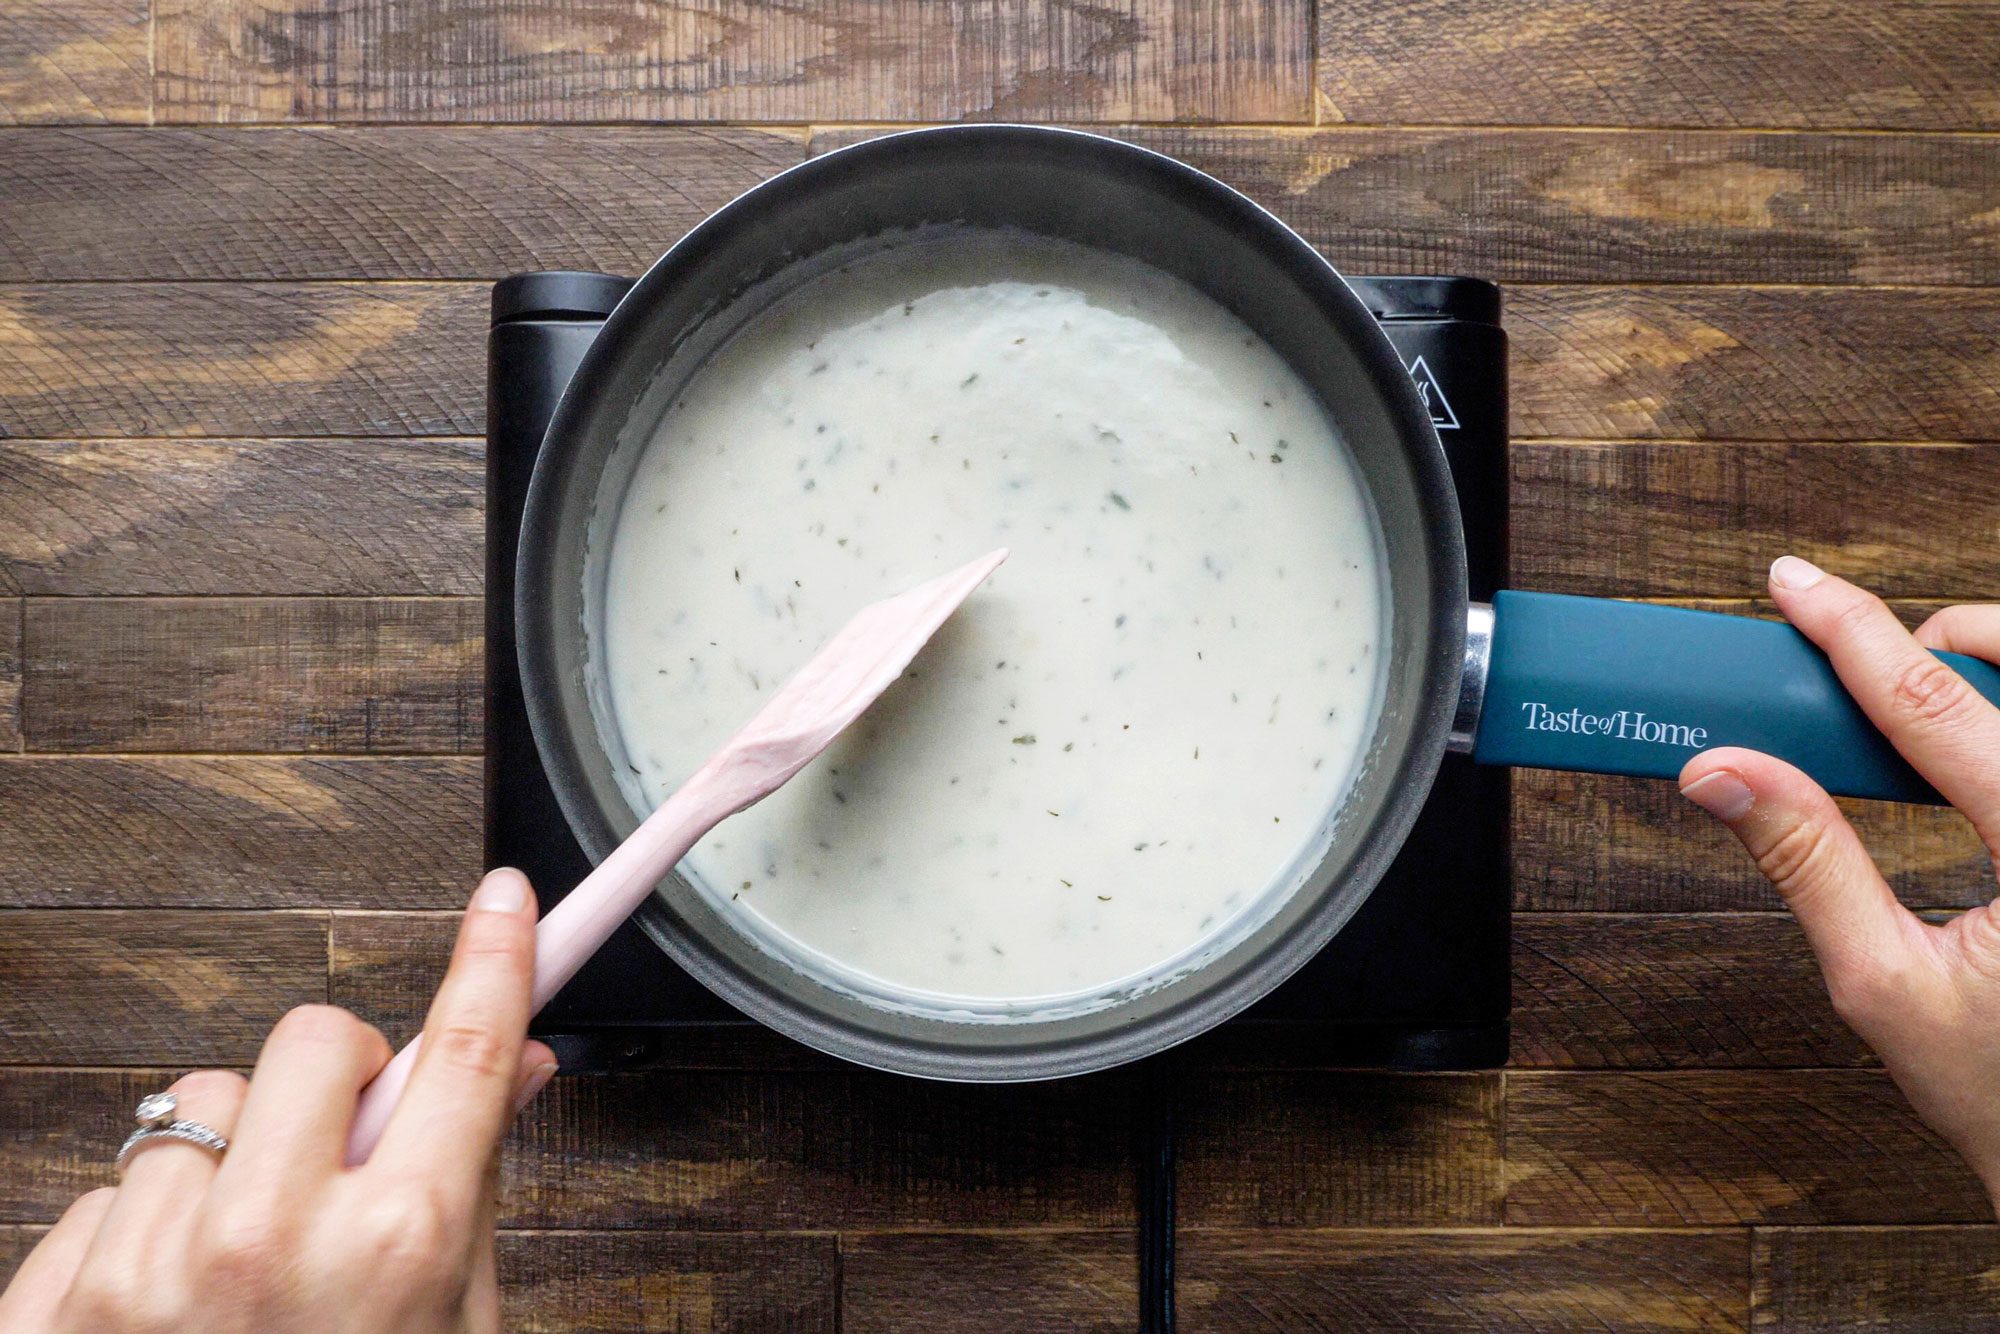 hands stirring the flour, dried parsley flakes, salt, dried thyme, pepper and milk together in a saucepan on a gas stove on a wooden surface